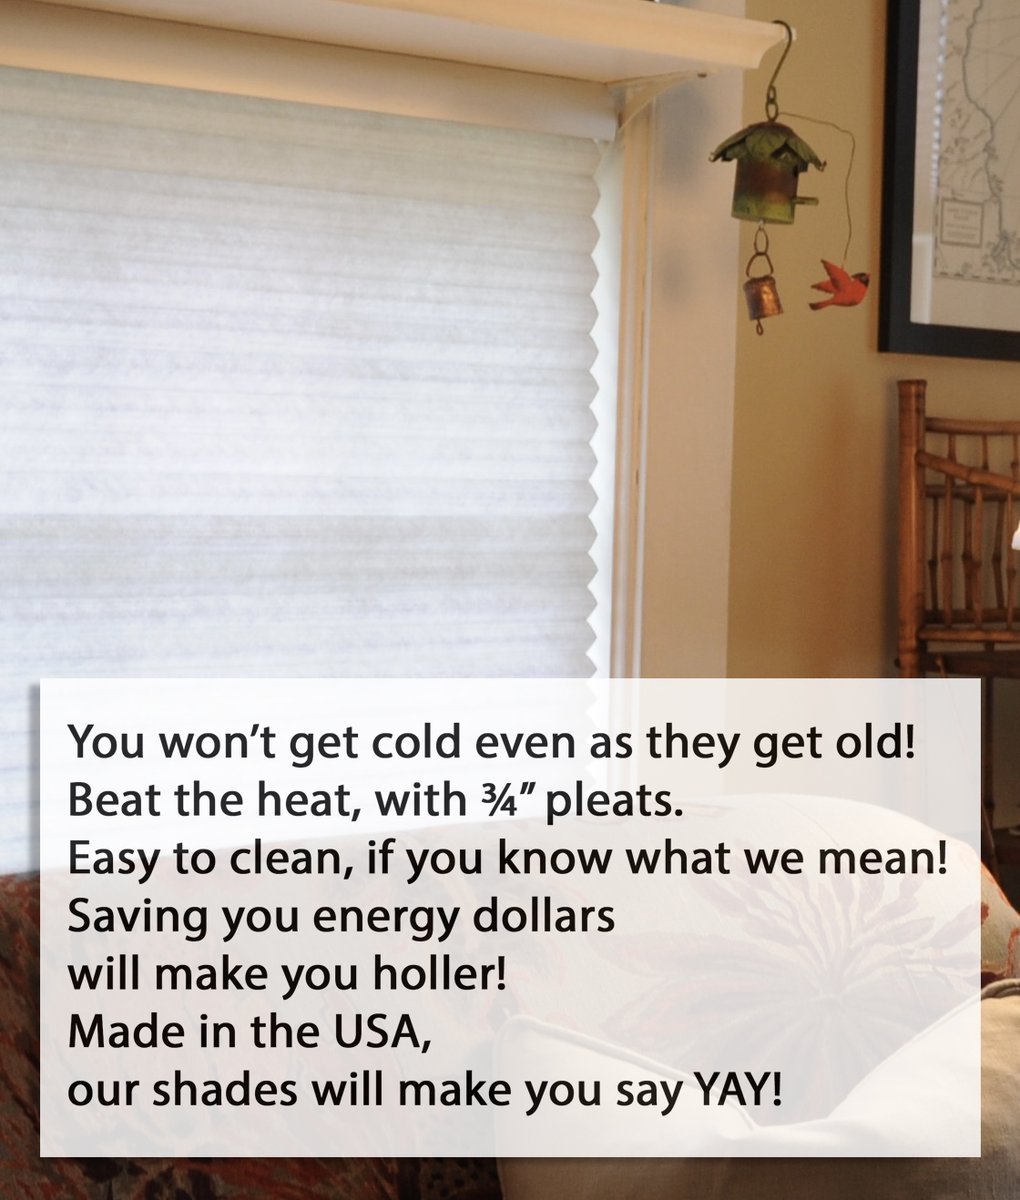 Did you know our EcoSmart Shade Gurus are renaissance peeps??

They service.
They sell.
They write POEMS???!

Yes indeedy!
Smart. EcoSmart.
ecosmartshades.com

#poem #poet #diy #supportsmallbusiness #MadeinUSA #AmericanMade